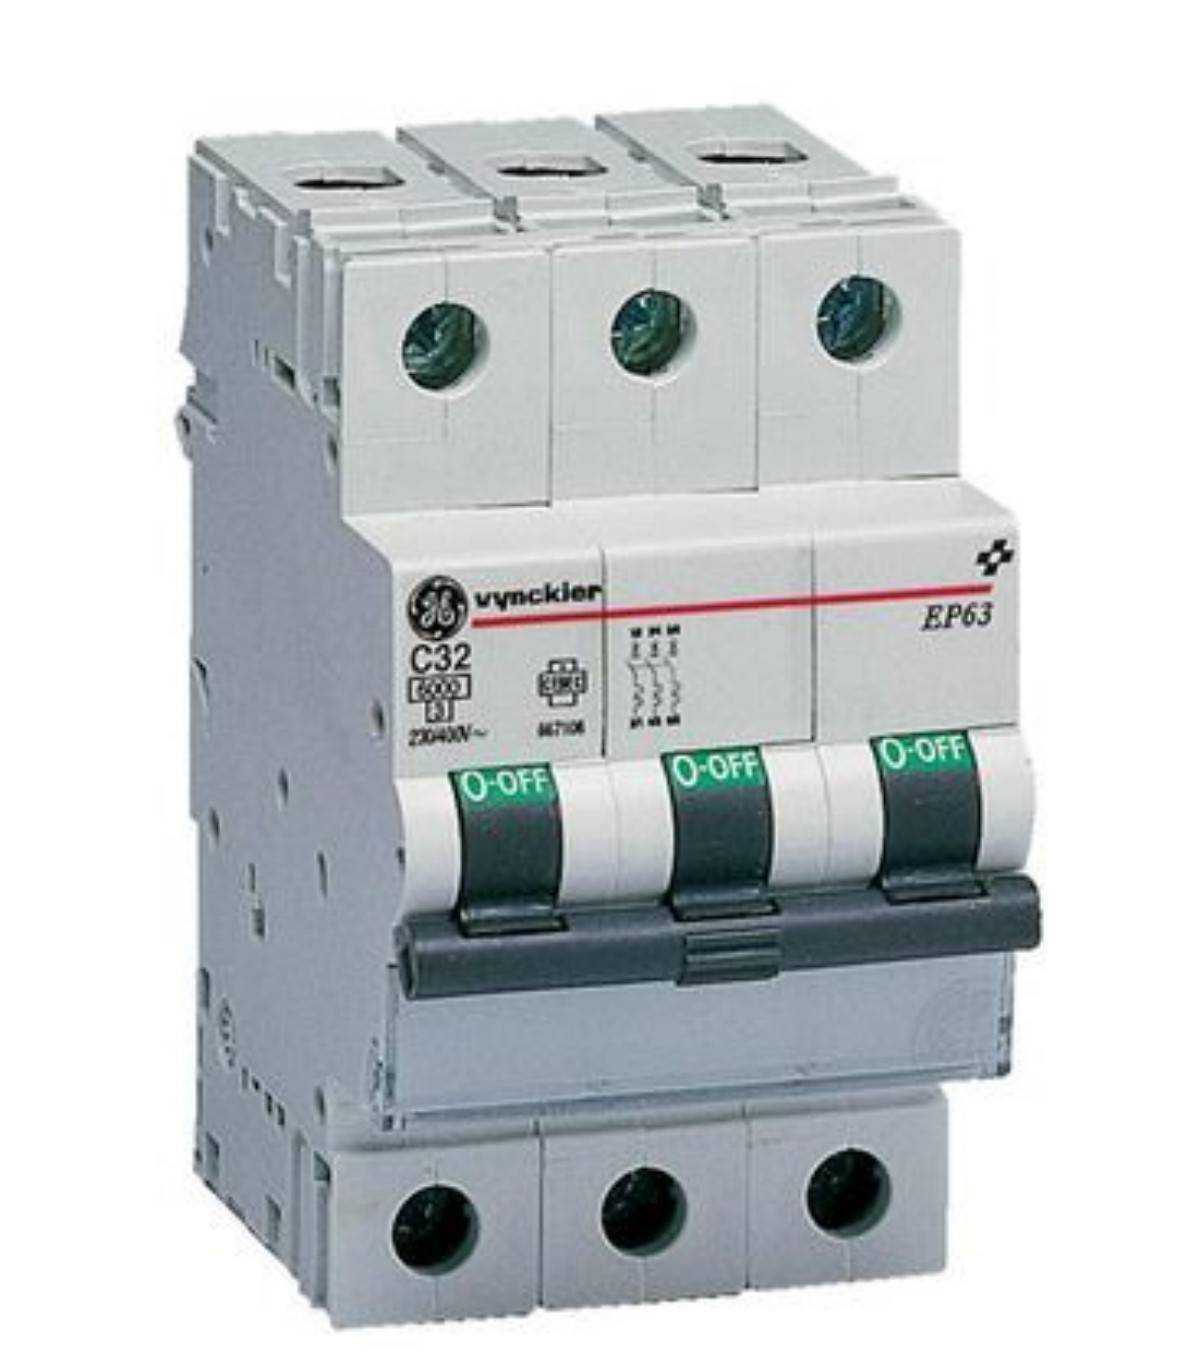 GE POWER 566618 EP63D40 Switch - Image 1